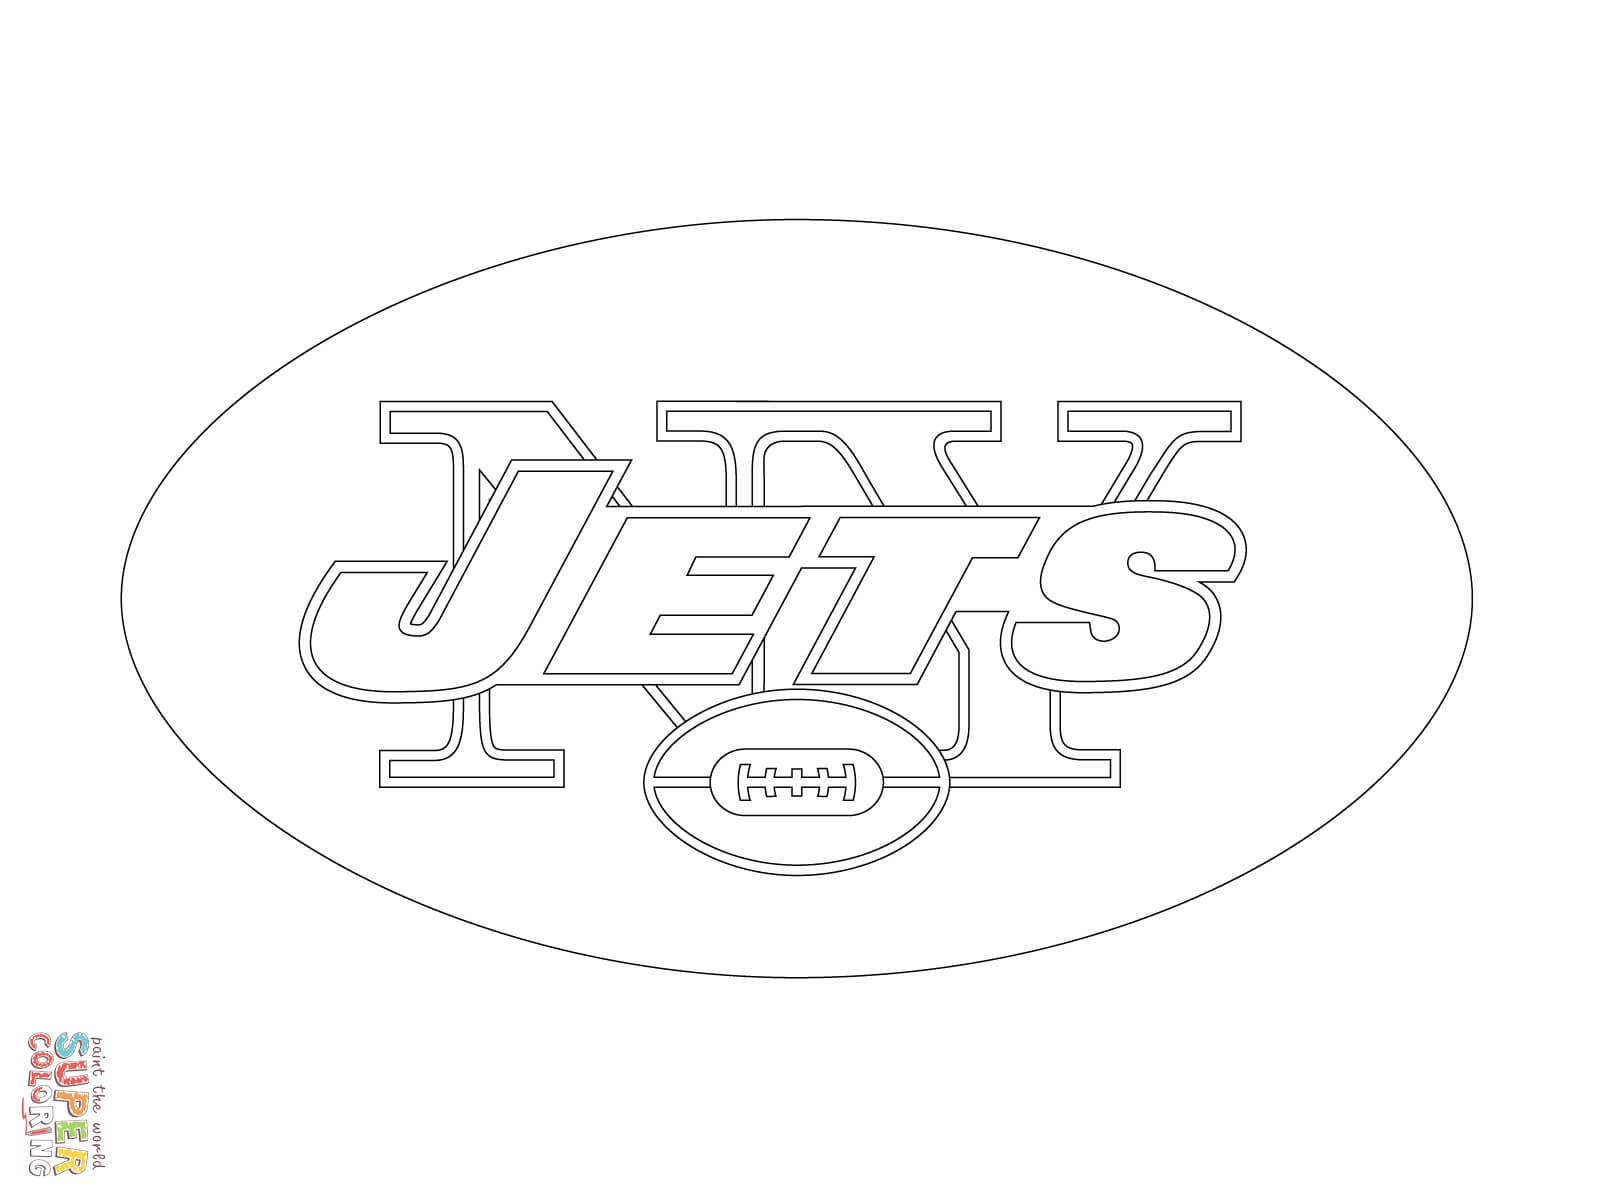 New York Jets Logo coloring page | Free Printable Coloring Pages